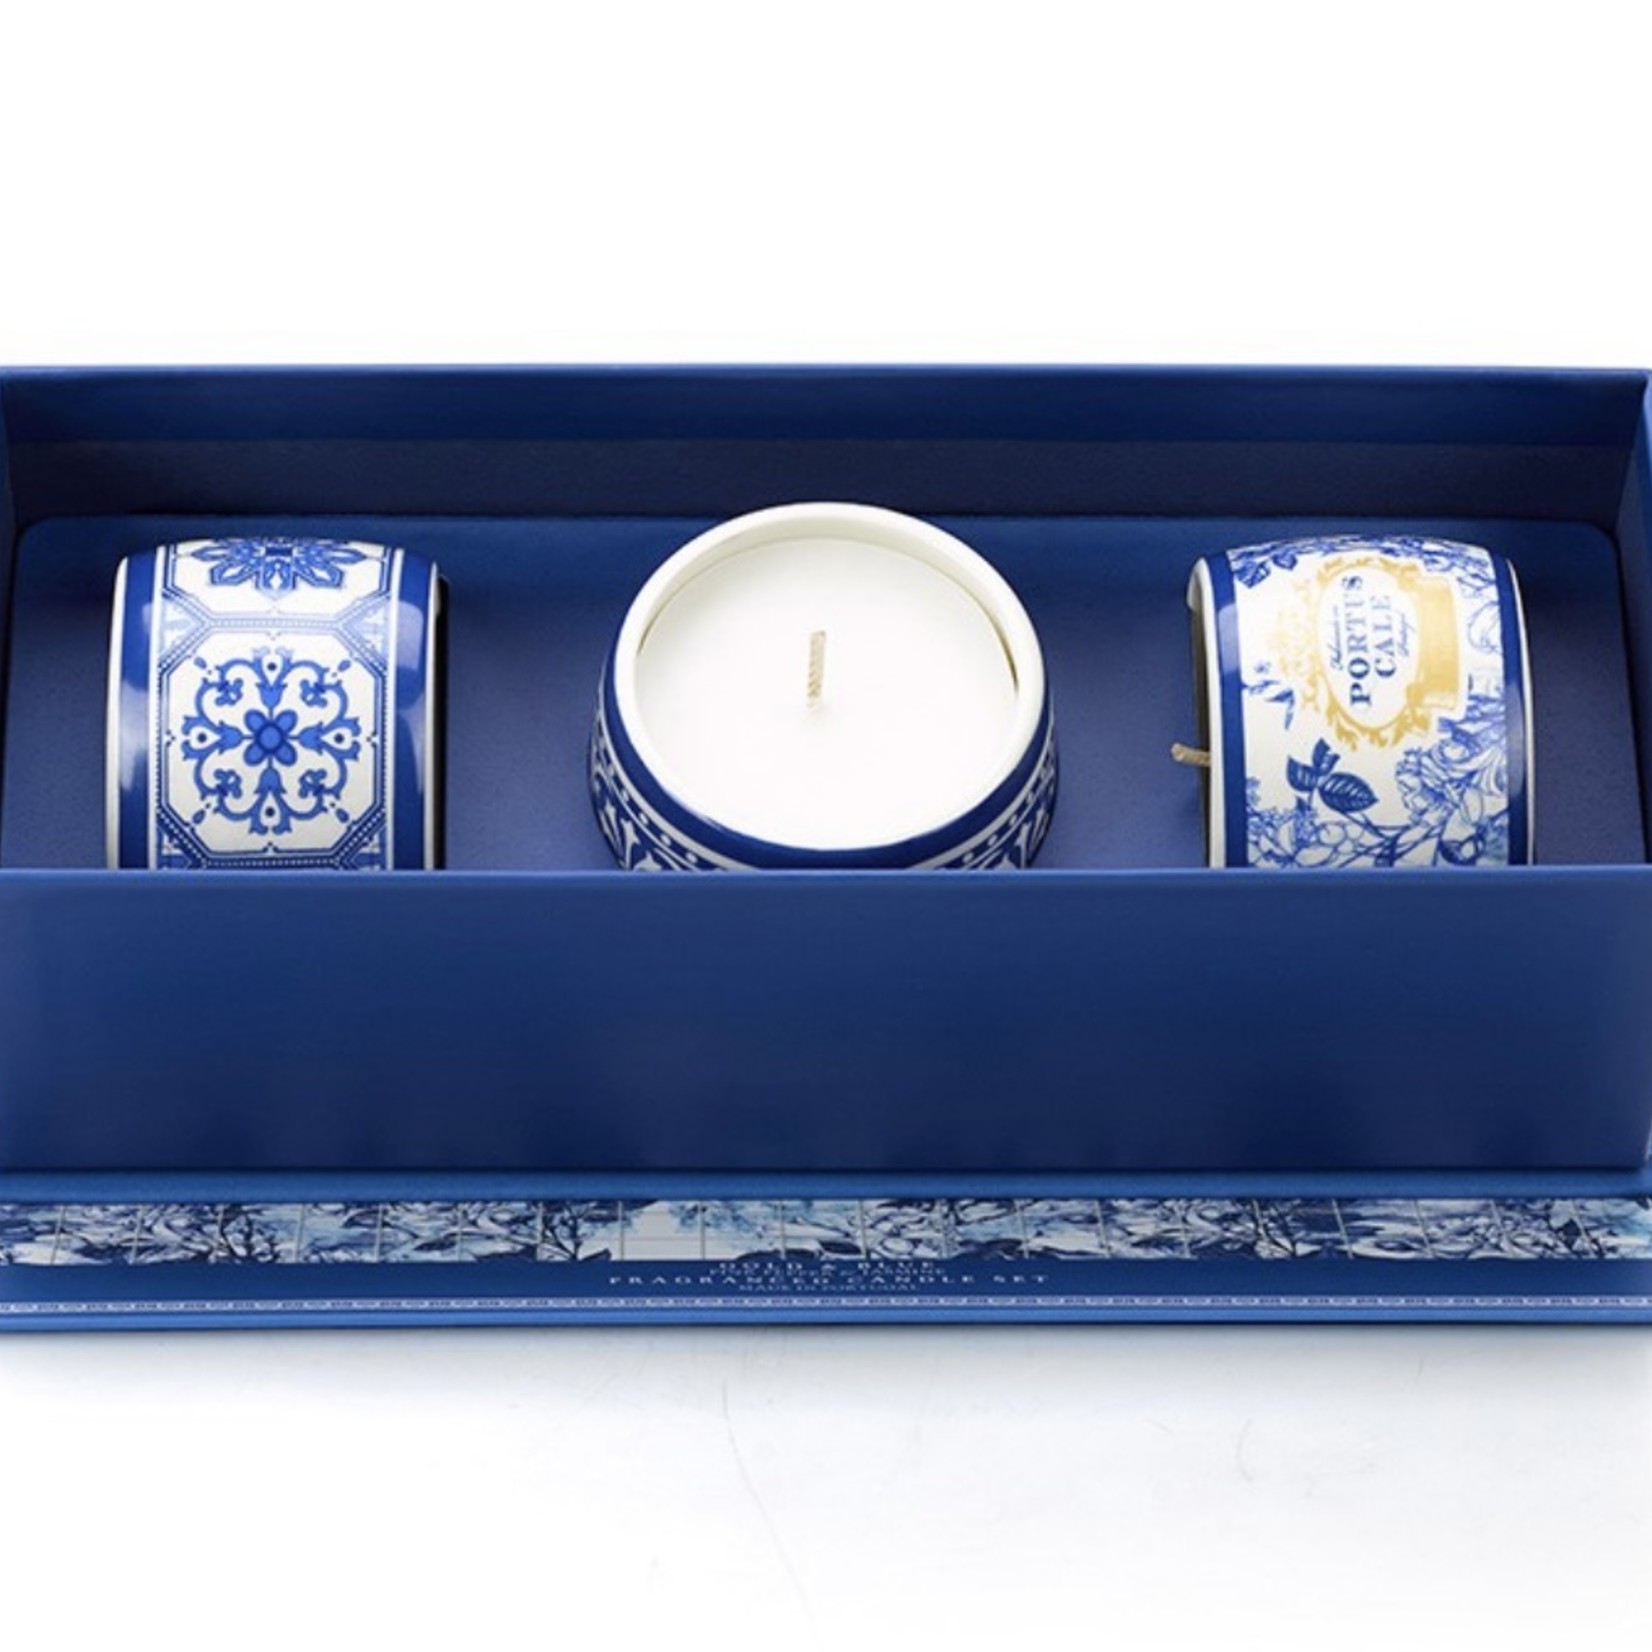 Candle Set by Portus Cale